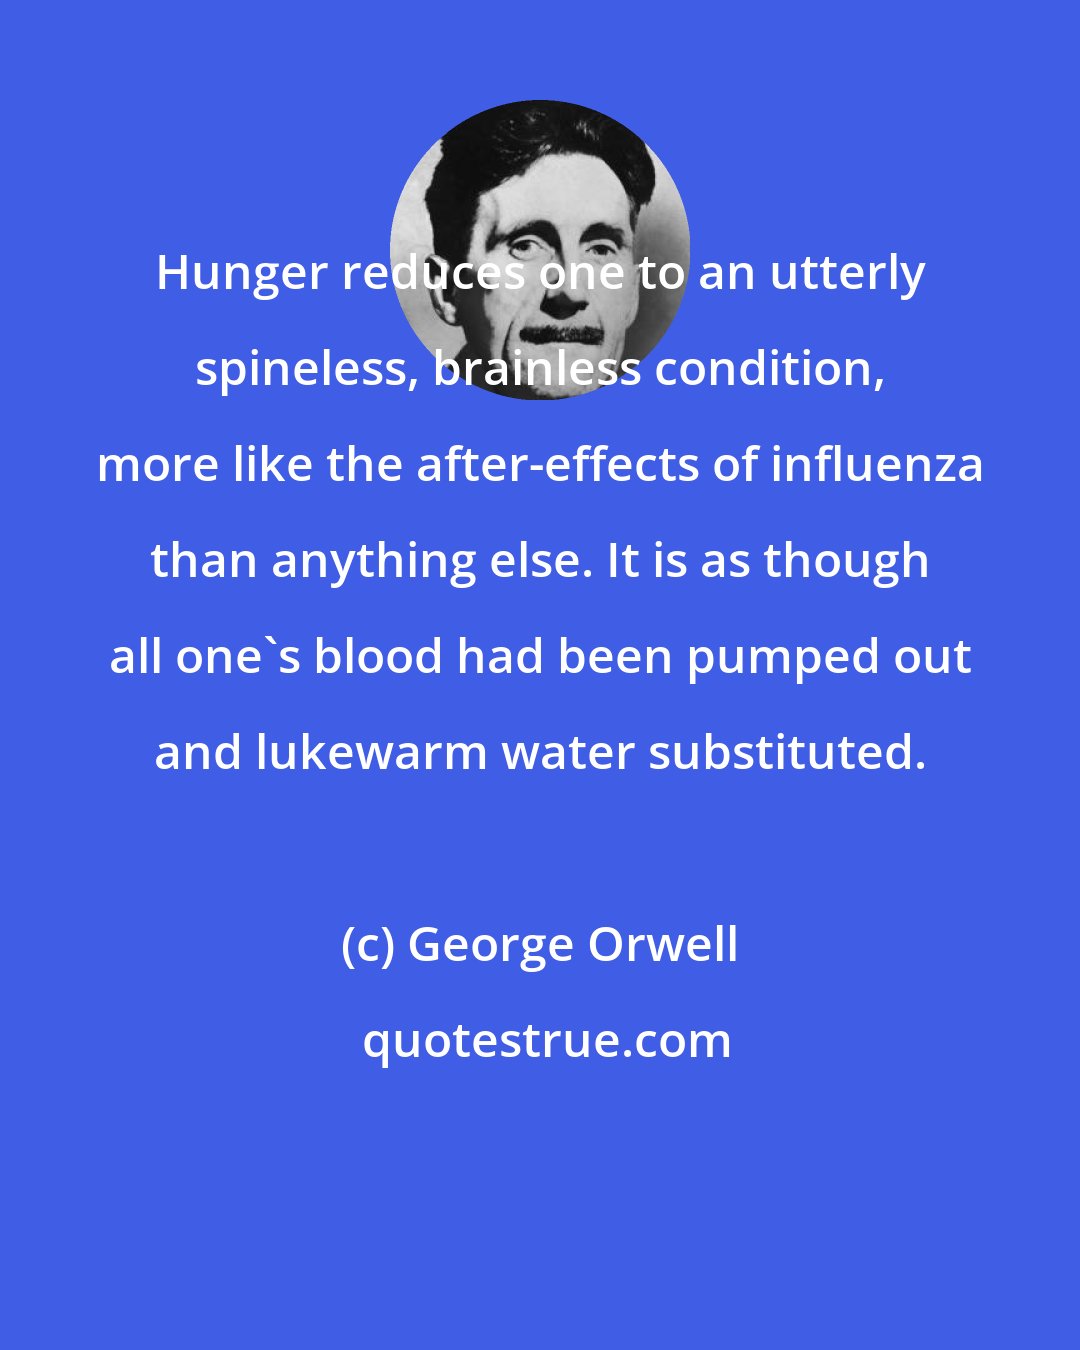 George Orwell: Hunger reduces one to an utterly spineless, brainless condition, more like the after-effects of influenza than anything else. It is as though all one's blood had been pumped out and lukewarm water substituted.